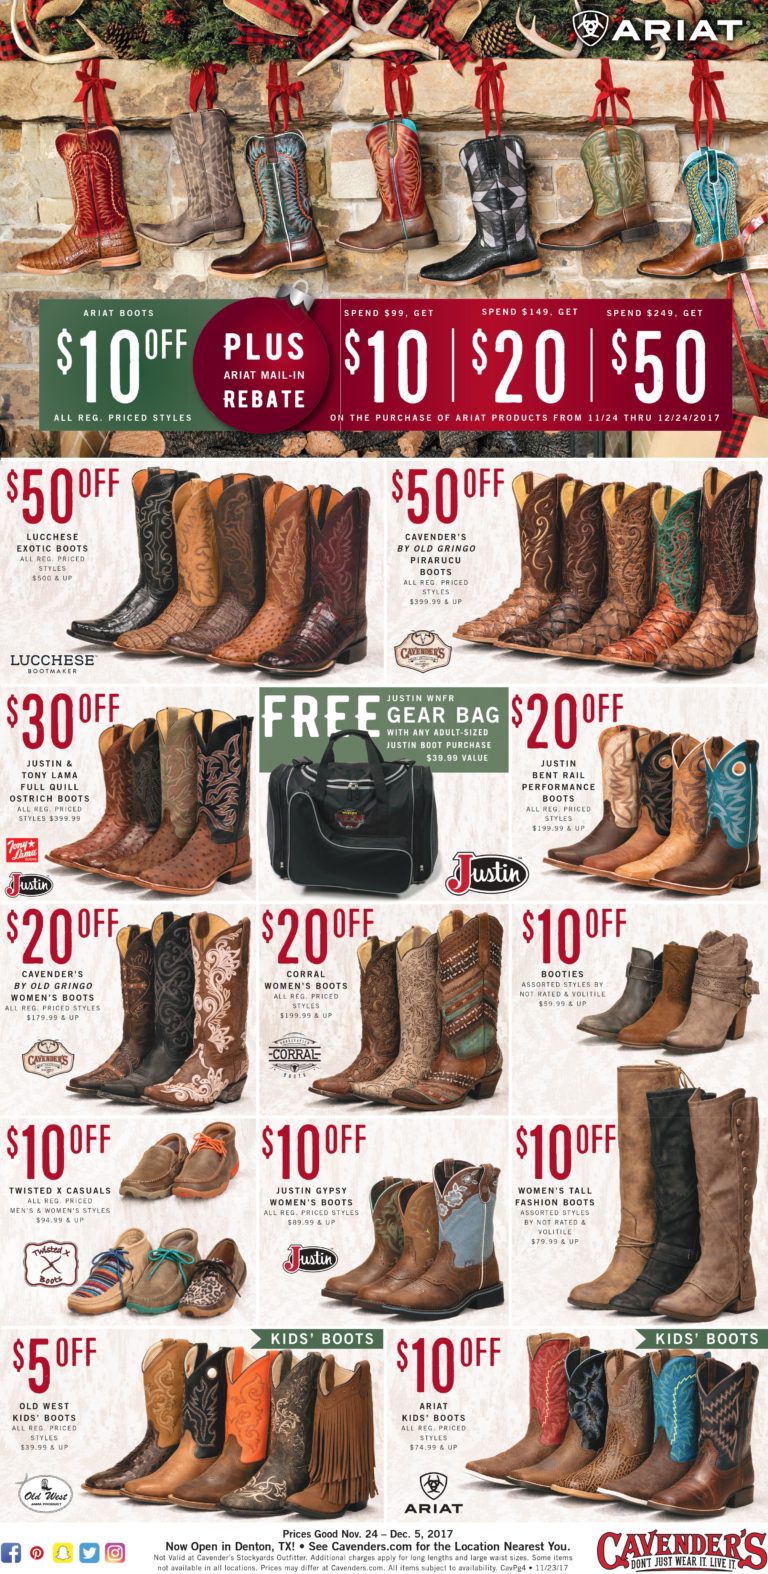 Cavender's Black Friday Ad 2017 - Does Lucchese Have Black Friday Deals